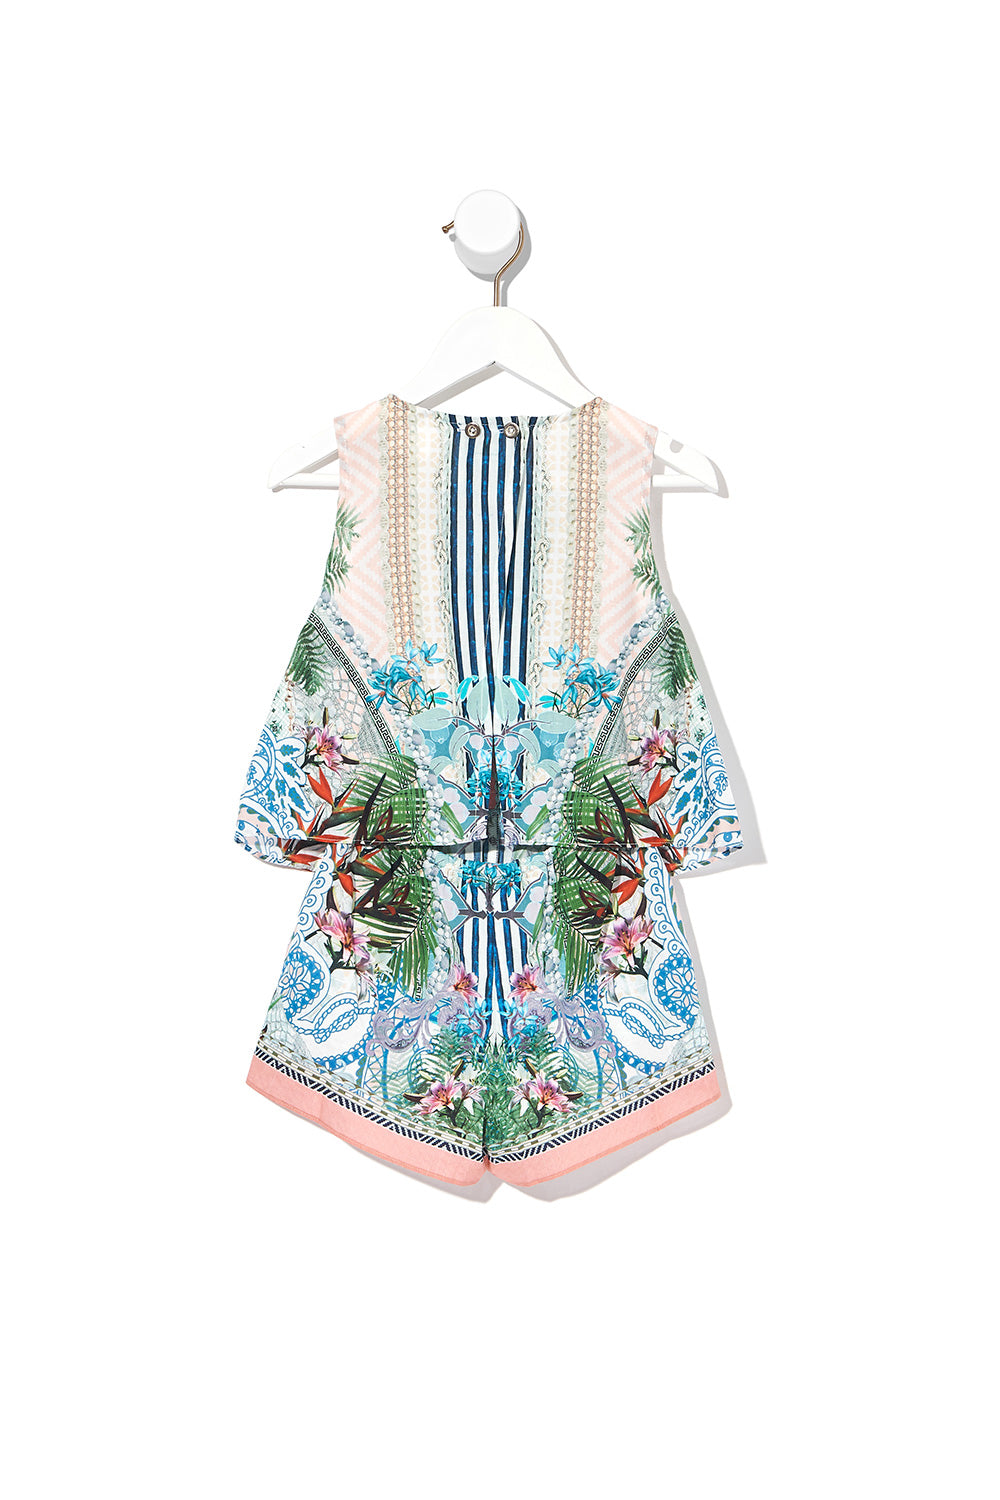 KIDS DOUBLE LAYER PLAYSUIT BEACH SHACK